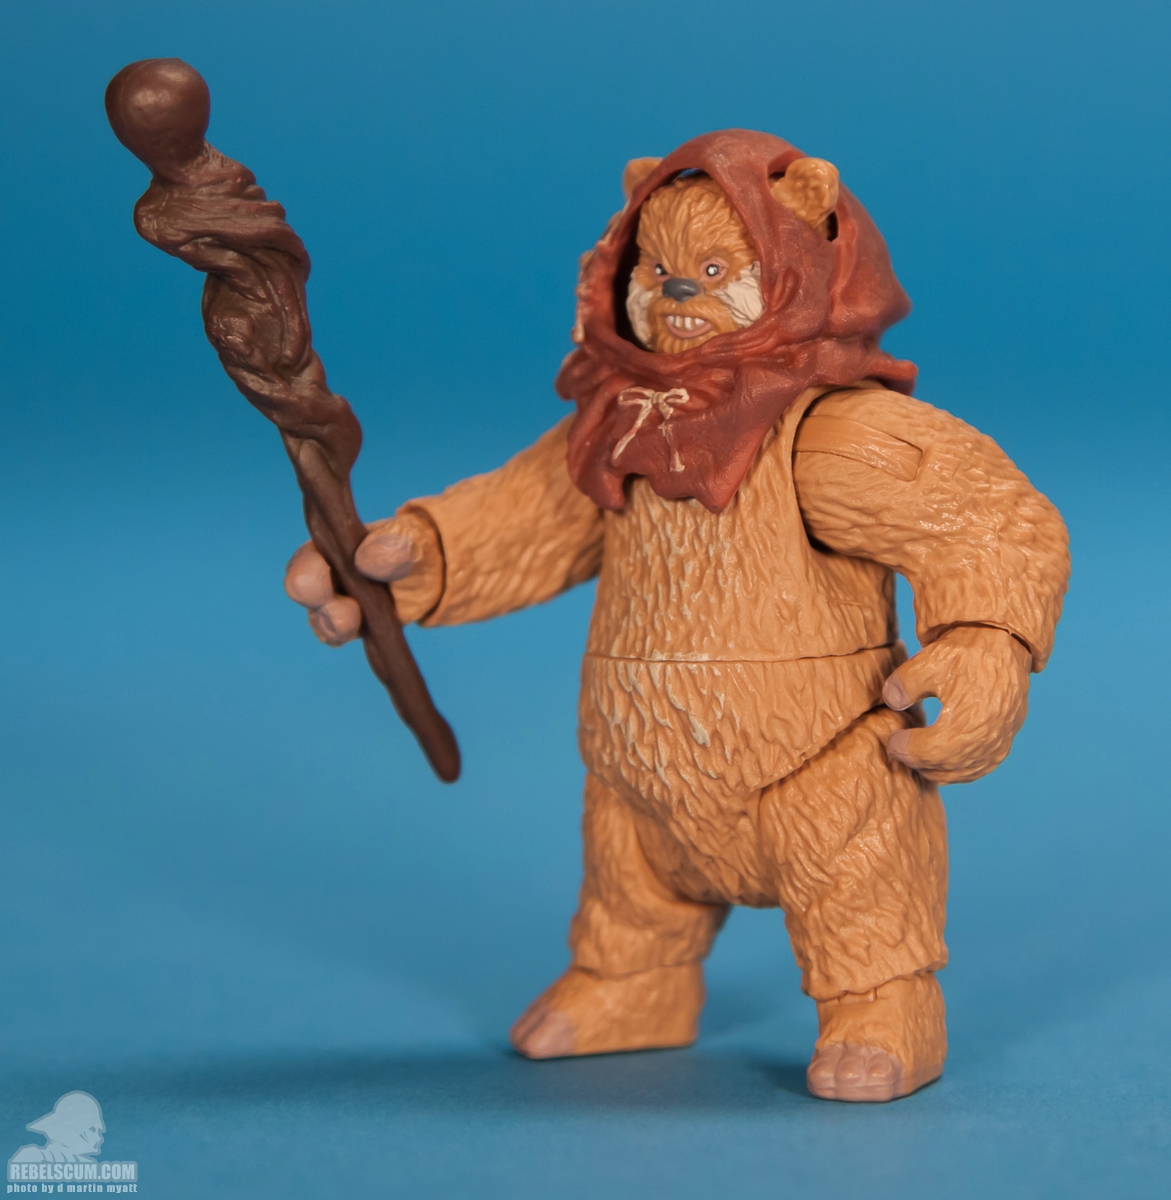 Ewok_Scouts_The_Vintage_Collection_TVC_Kmart-07.jpg